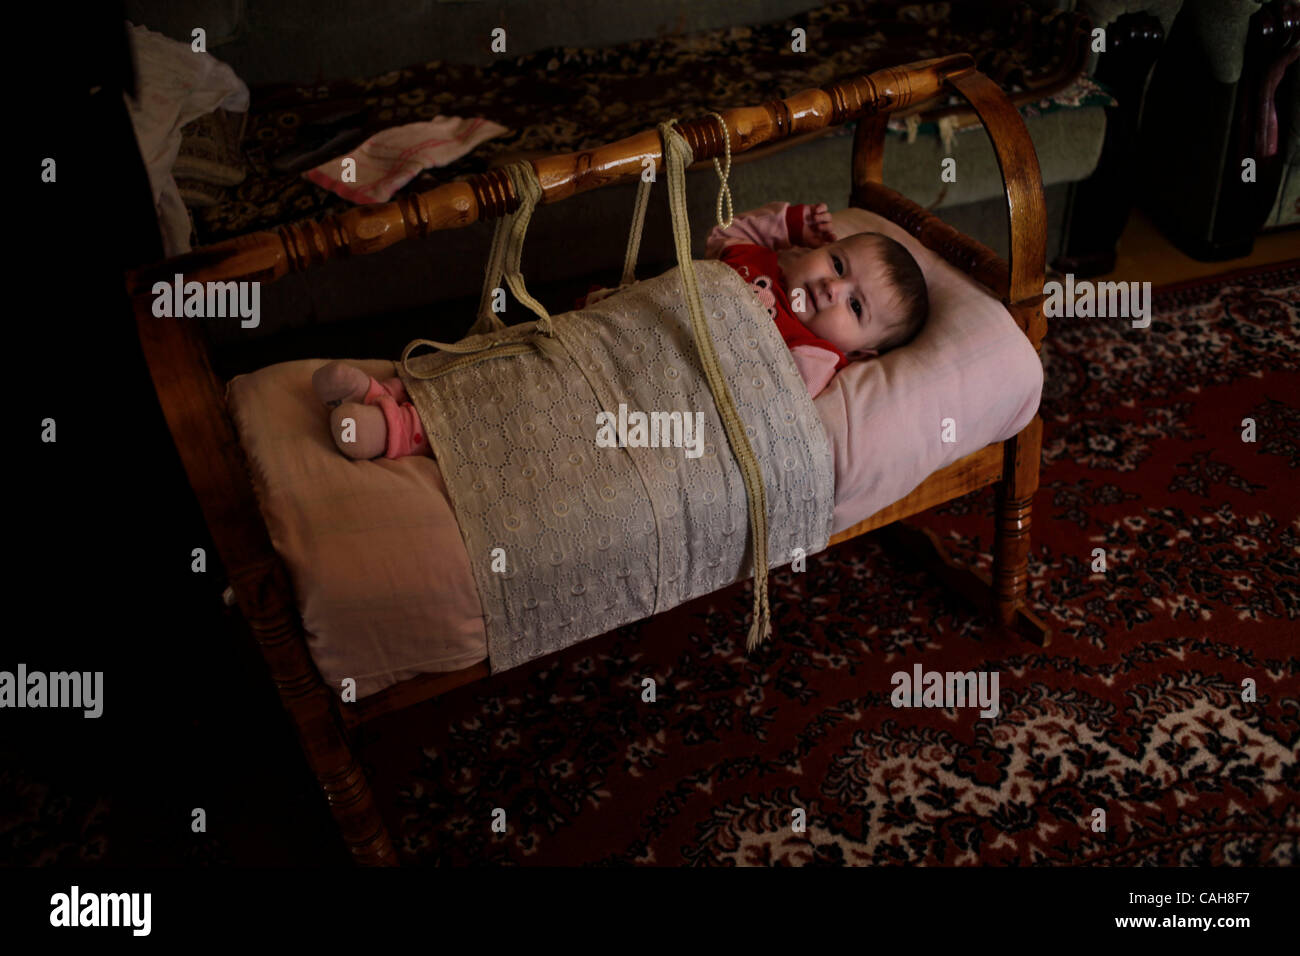 Nov 24, 2010 - Dagestan, Russia - A Dagestani baby, who is now considered an orphan after her father was killed, rests in traditional Dagestani baby bed, known as an 'aga.' (Credit Image: © Diana Markosian/zReportage.com/ZUMA) Stock Photo